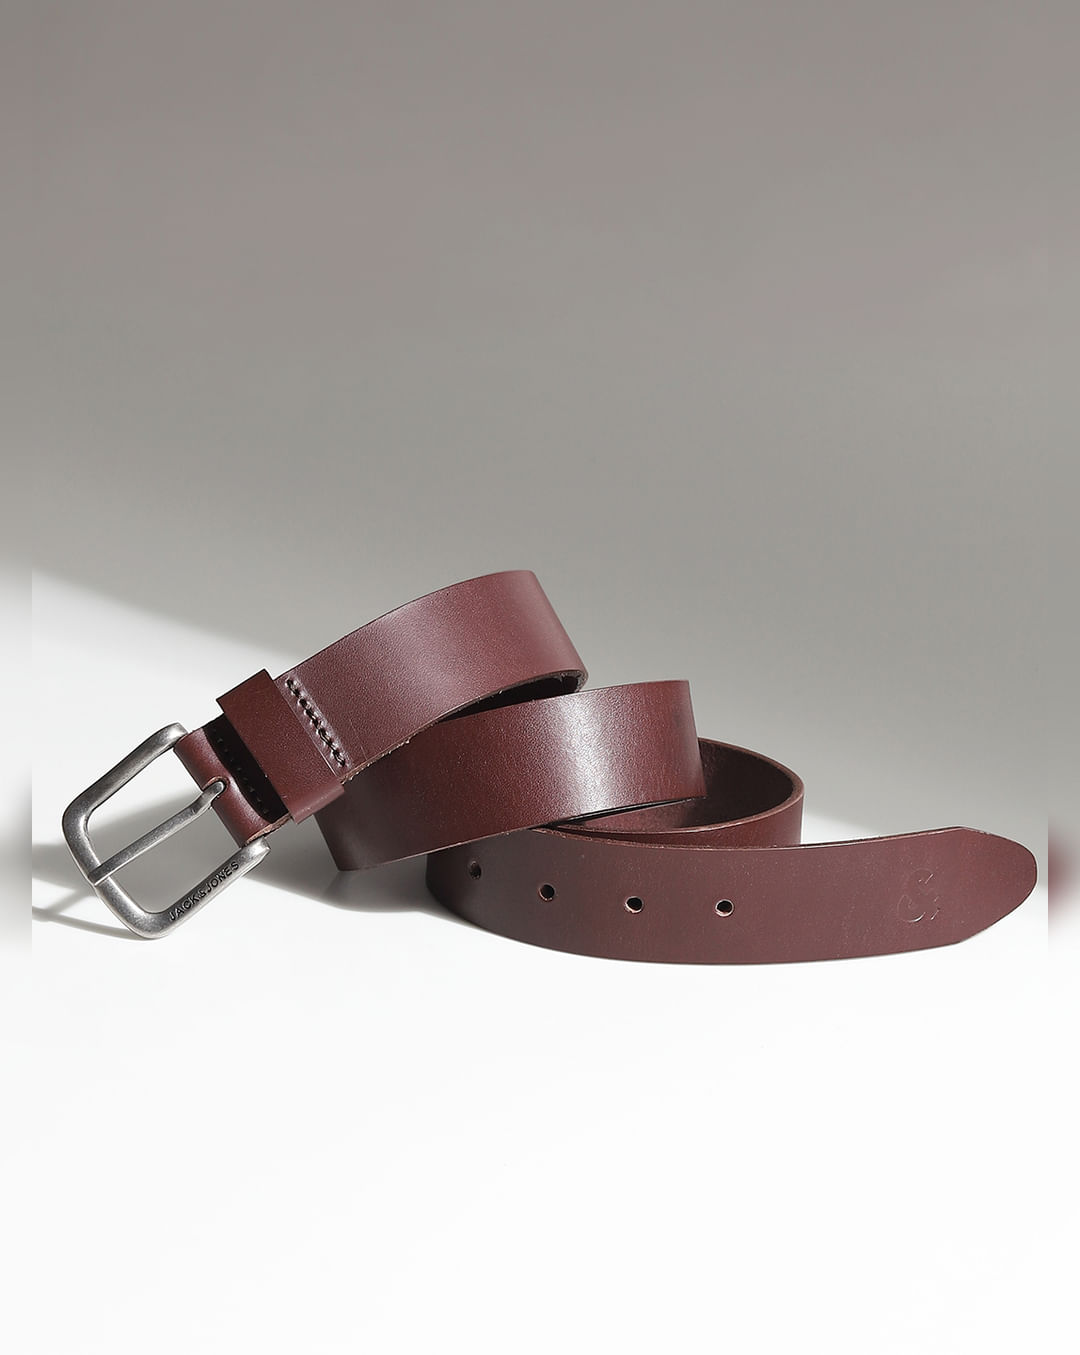 Leather Belt with Tang Buckle Closure